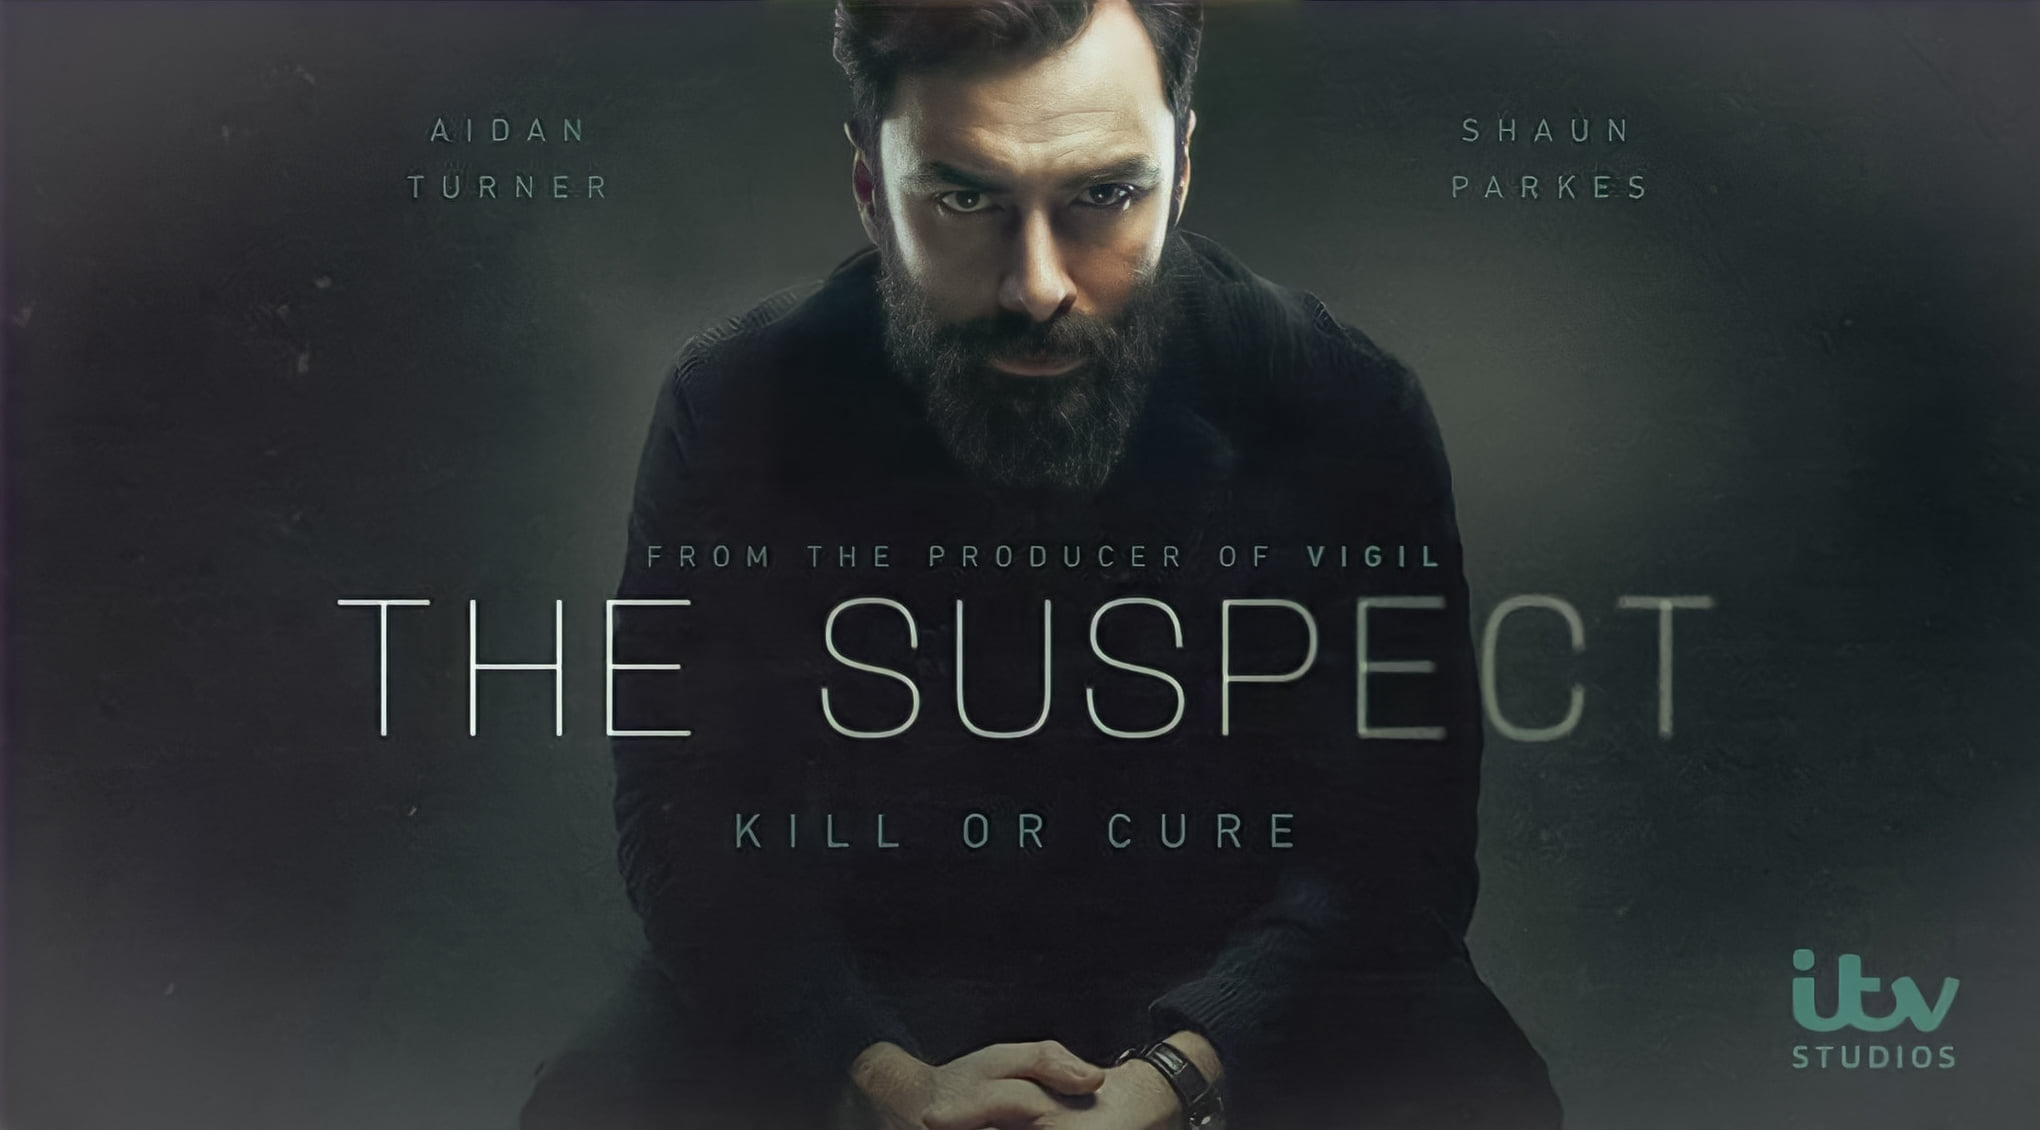 The Suspect Episode 3 Release Date